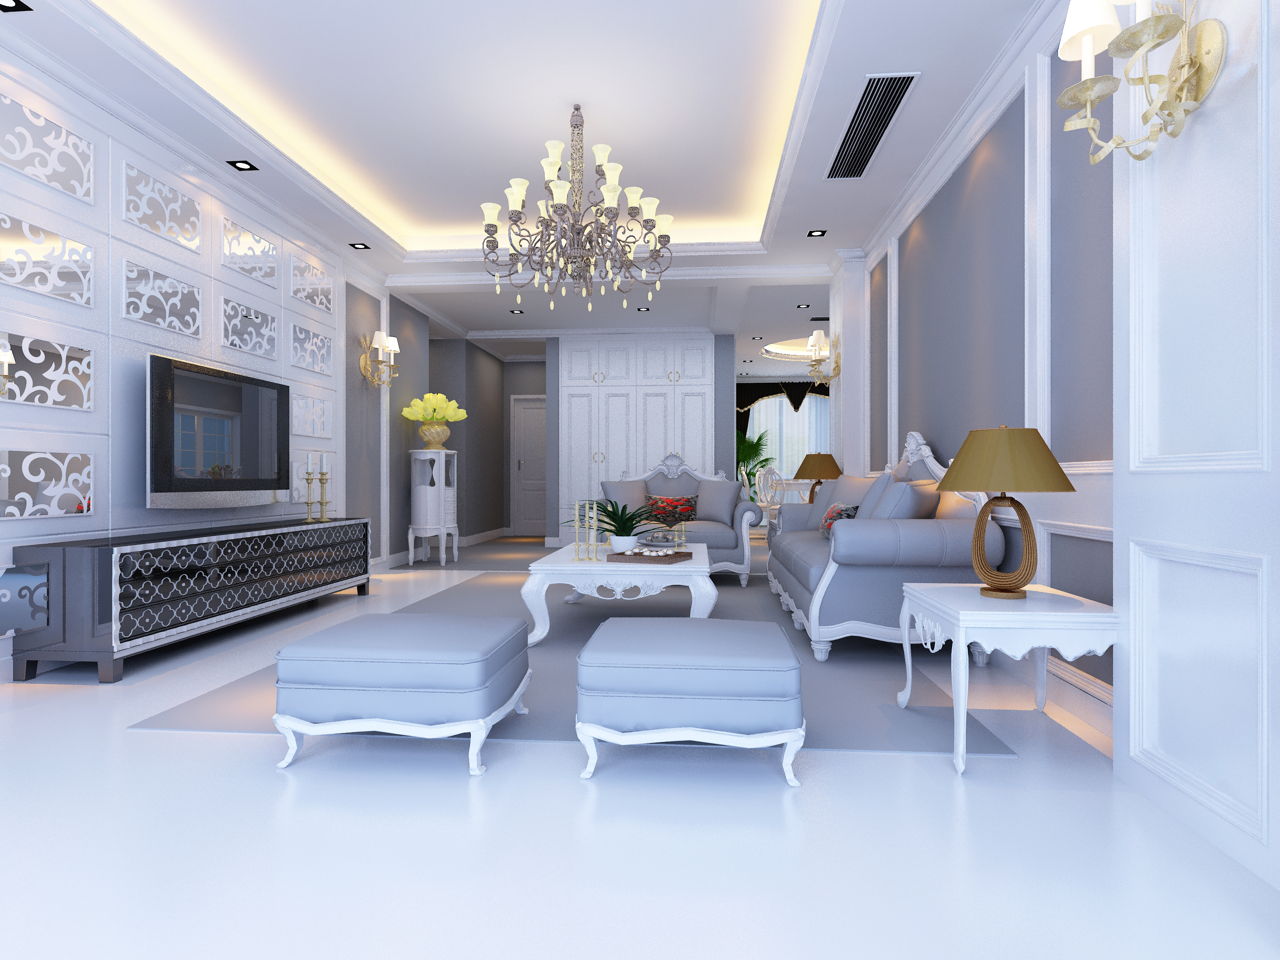 Interior House Paint Colors Pictures India : If you're planning on